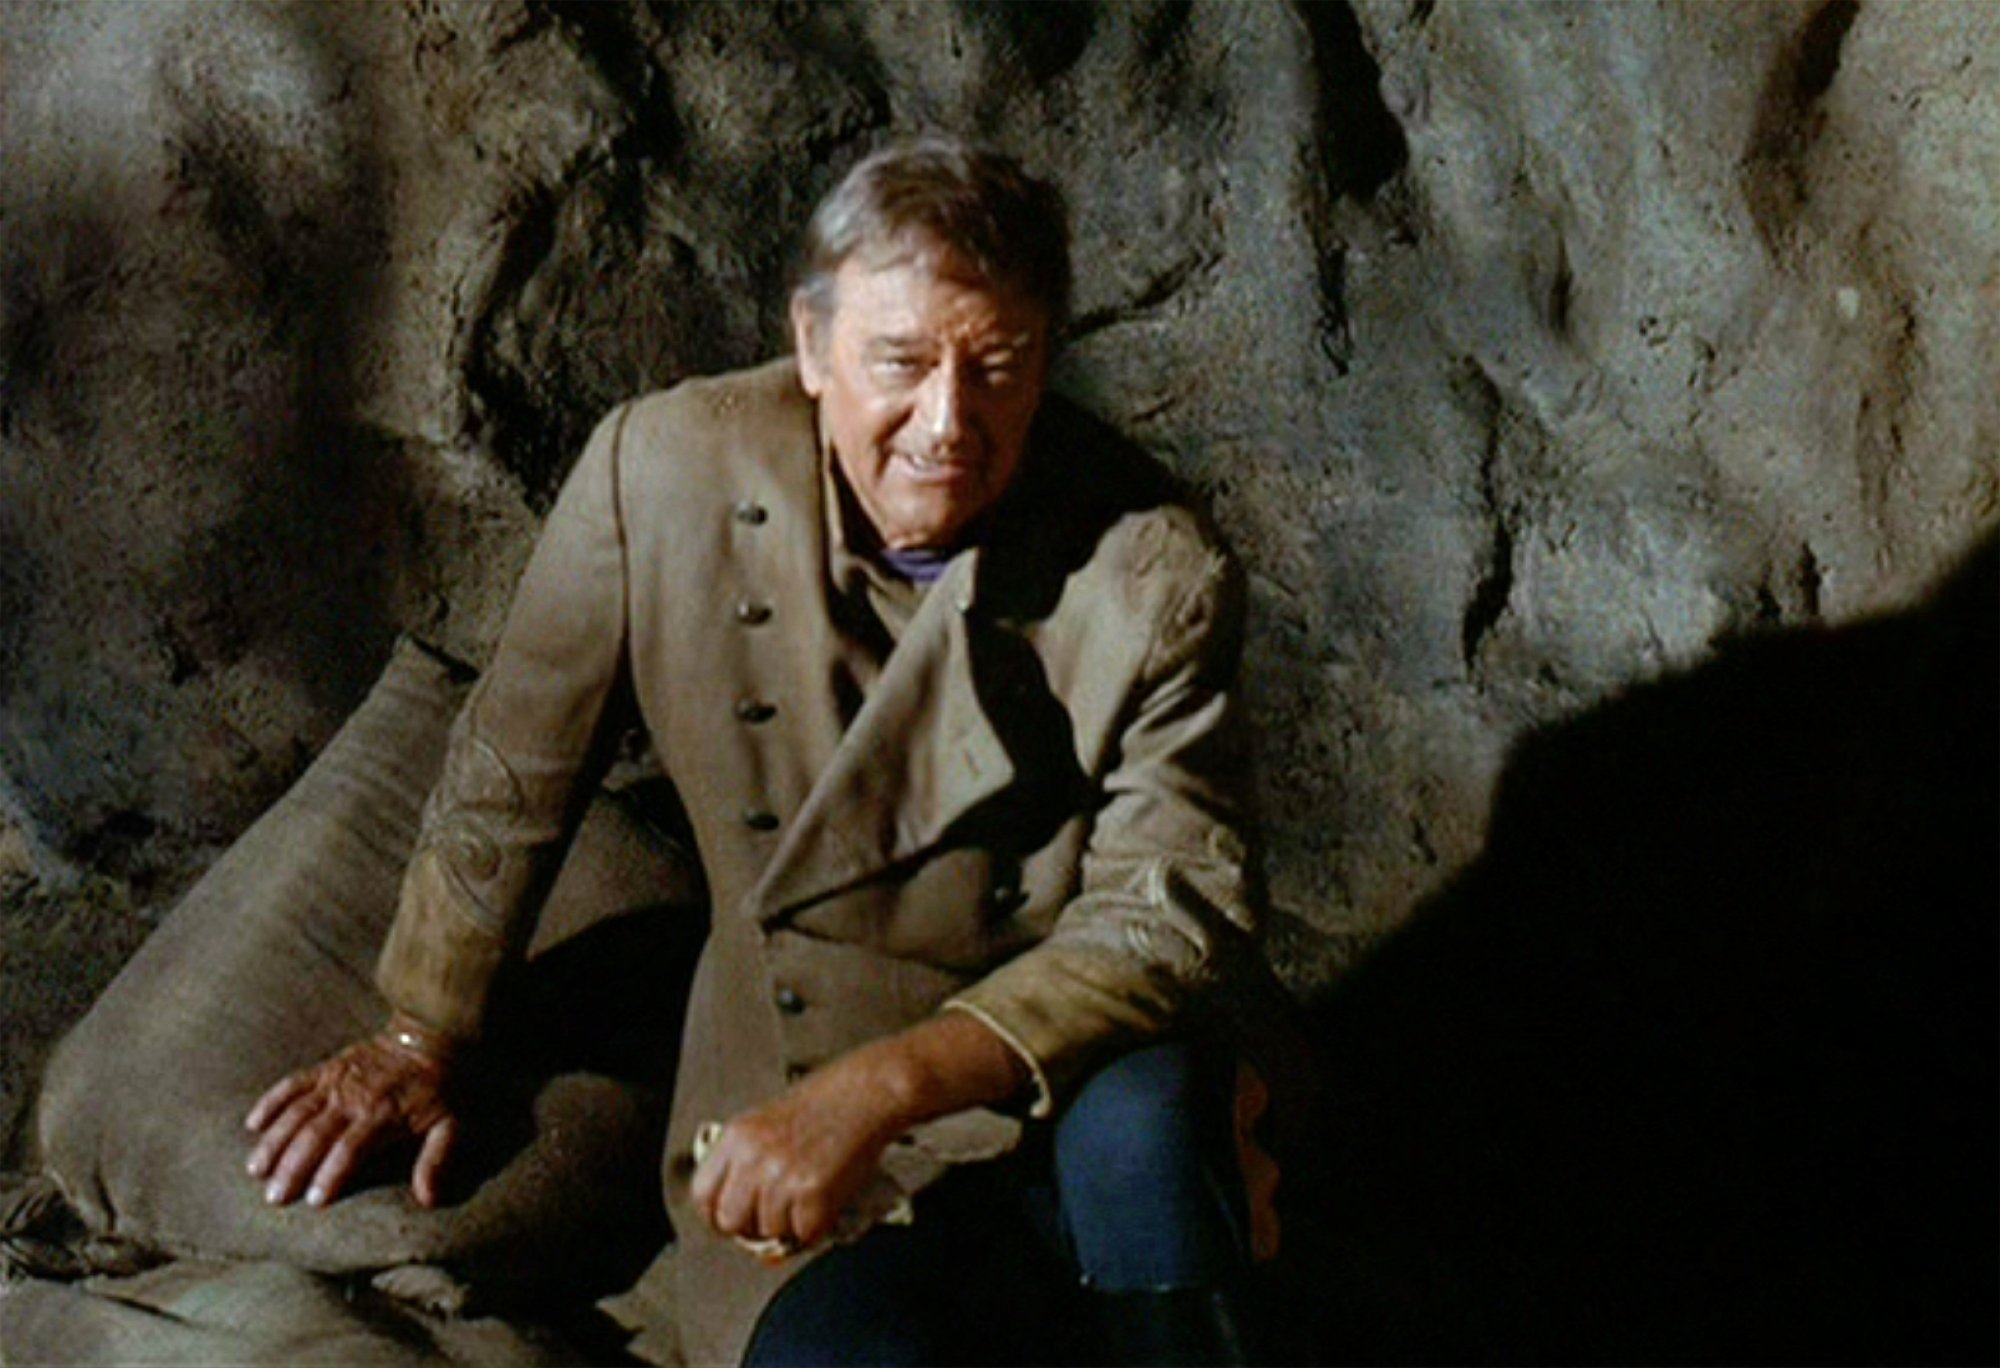 John Wayne as Colonel Cord McNally in 'Rio Lobo,' who isn't afraid of a fight. He's wearing his Western costume and resting back against a rock wall with his arm resting on his knee.